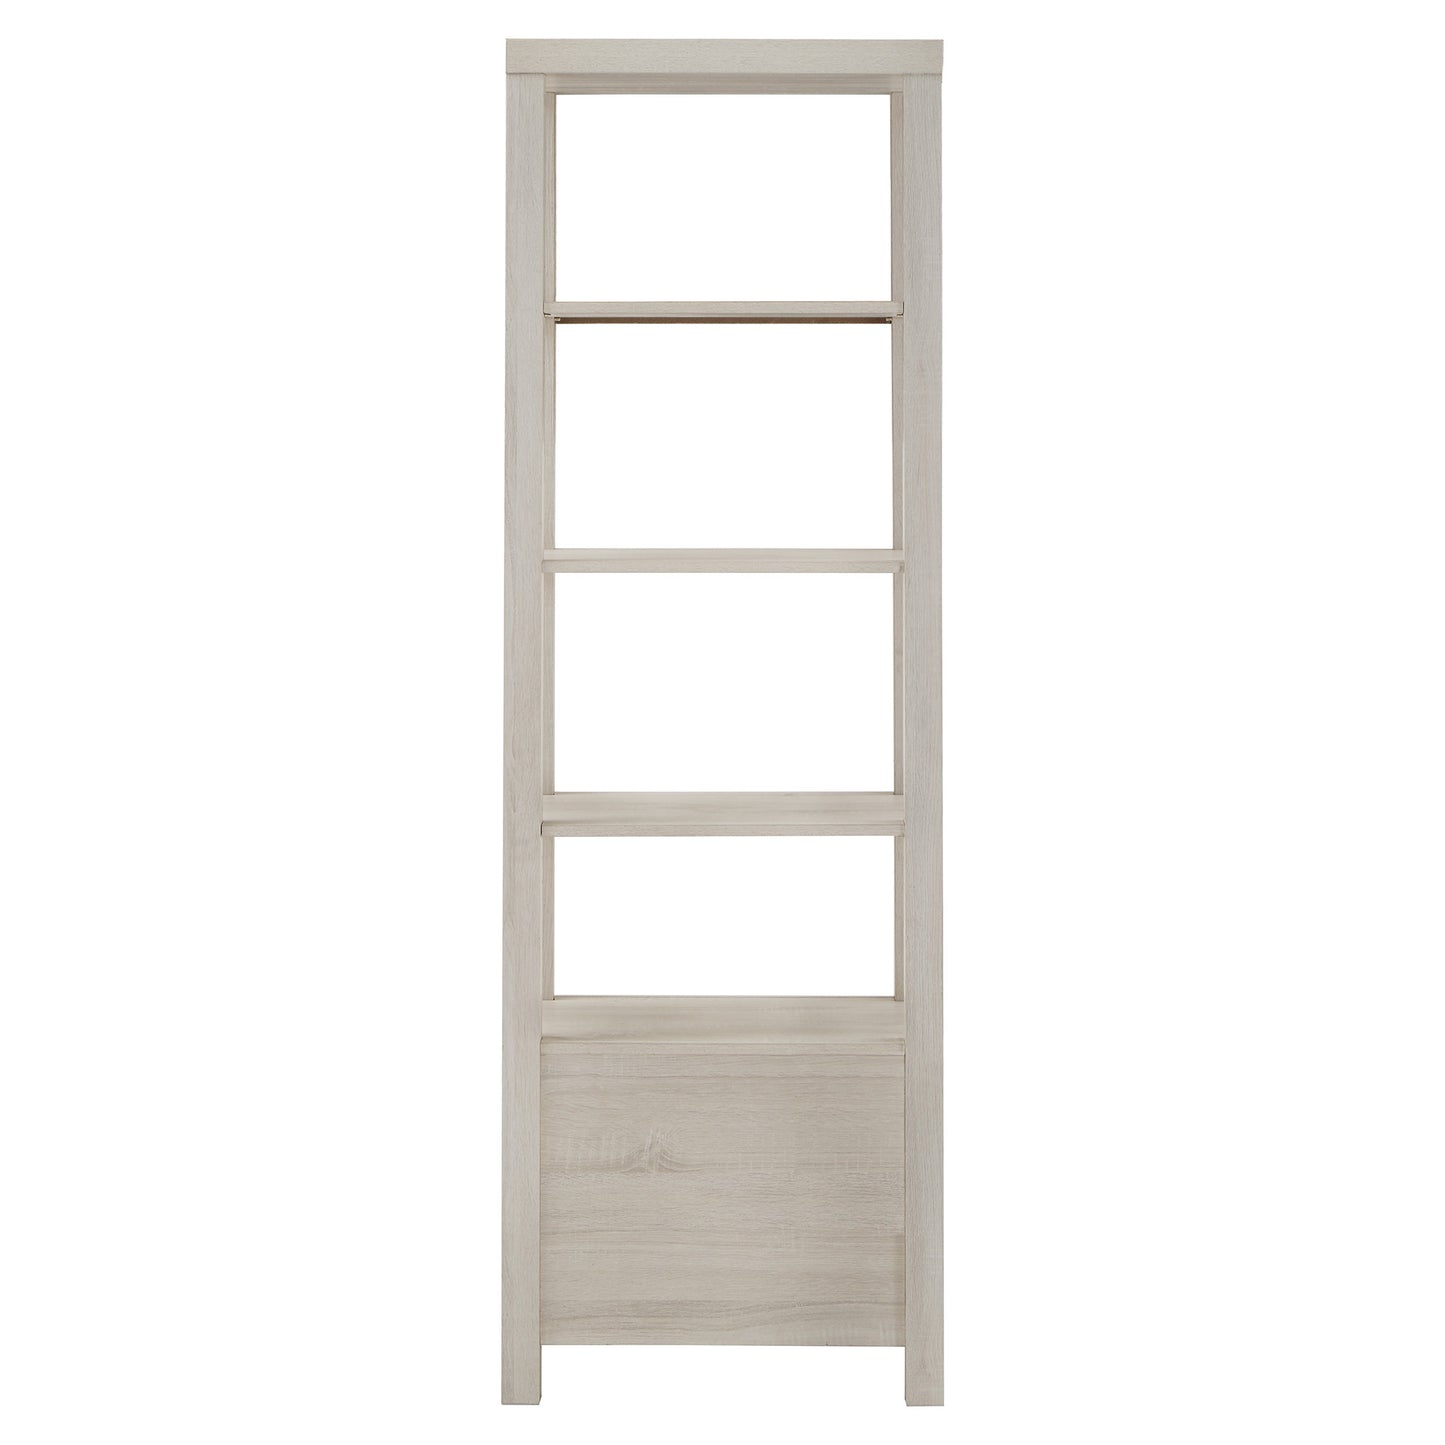 4-tier/5-tier Adjustable Bookshelf with Drawer - Antique White Finish